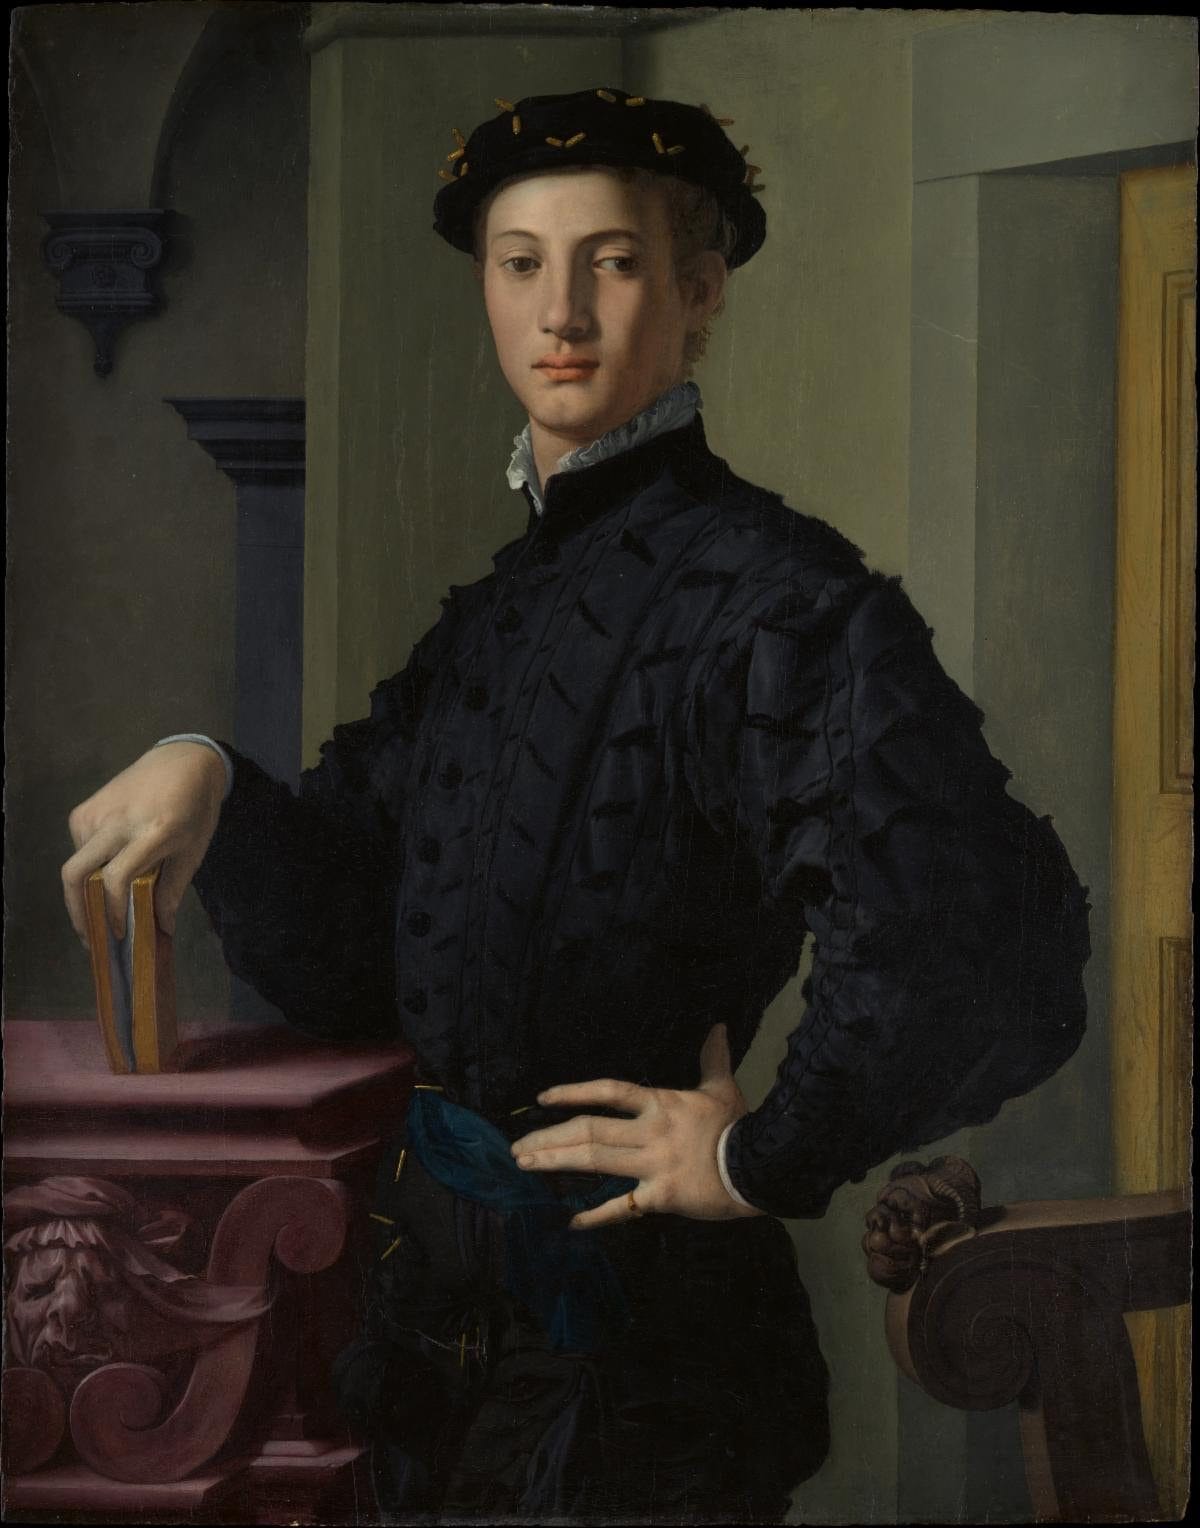 Bronzino (Agnolo di Cosimo di Mariano) (Italian, Monticelli 1503–1572 Florence). Portrait of a Young Man, 1530s. Oil on wood, 37 5/8 x 29 1/2 in. (95.6 x 74.9 cm). The Metropolitan Museum of Art, H. O. Havemeyer Collection, Bequest of Mrs. H. O. Havemeyer, 1929 (29.100.16)